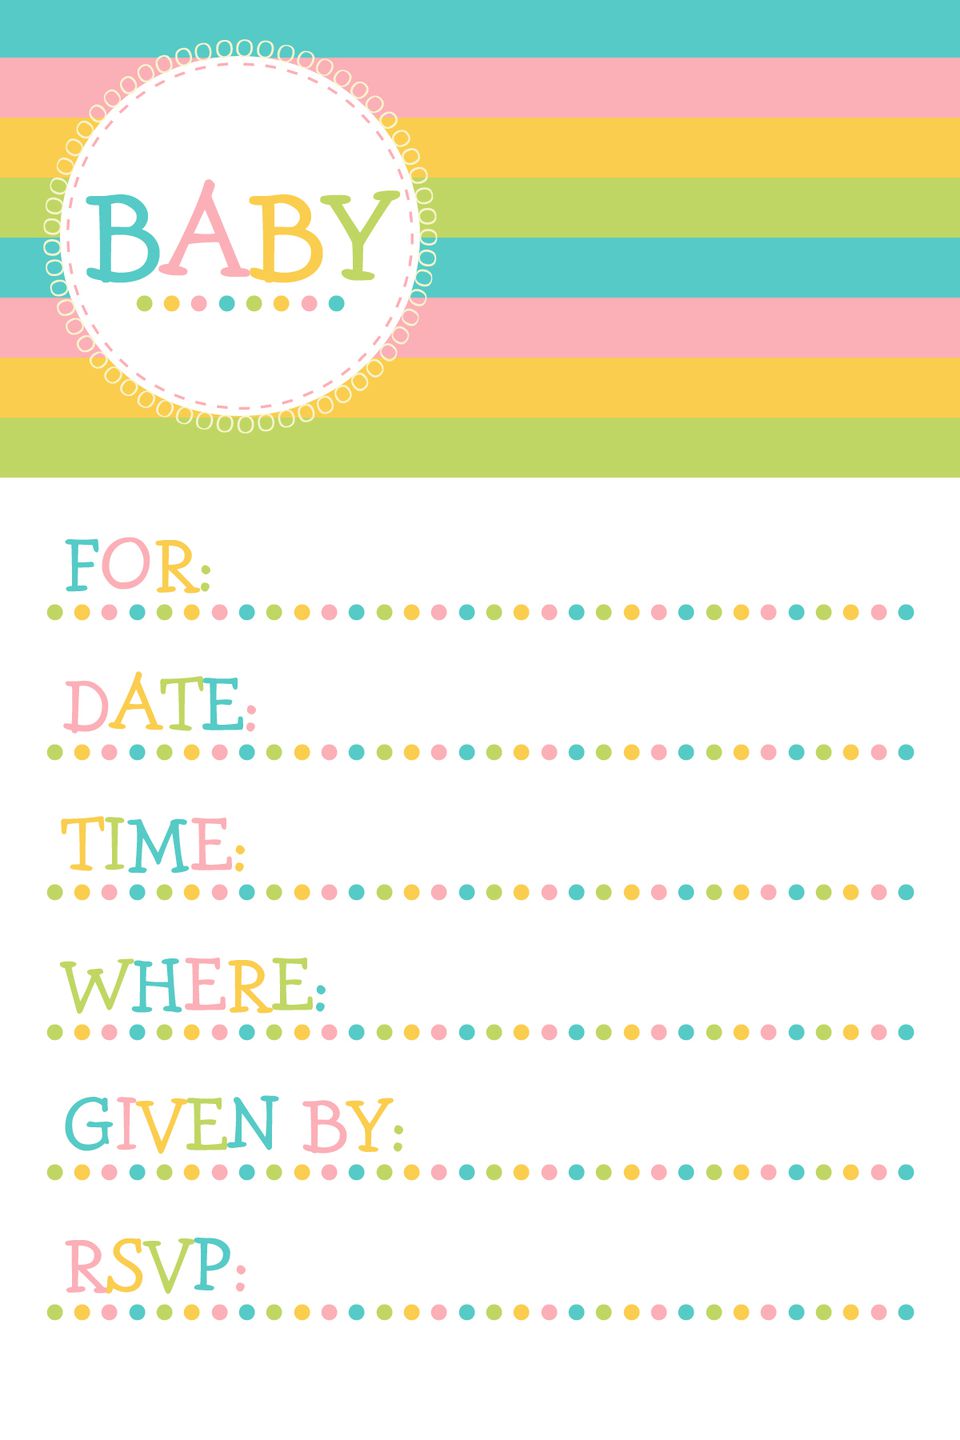 Full Size of Baby Shower:sturdy Baby Shower Invitation Template Image Concepts Baby Shower Invitation Template Girl Baby Shower Baby Shower Registry Baby Shower Host Baby Shower Gift Ideas